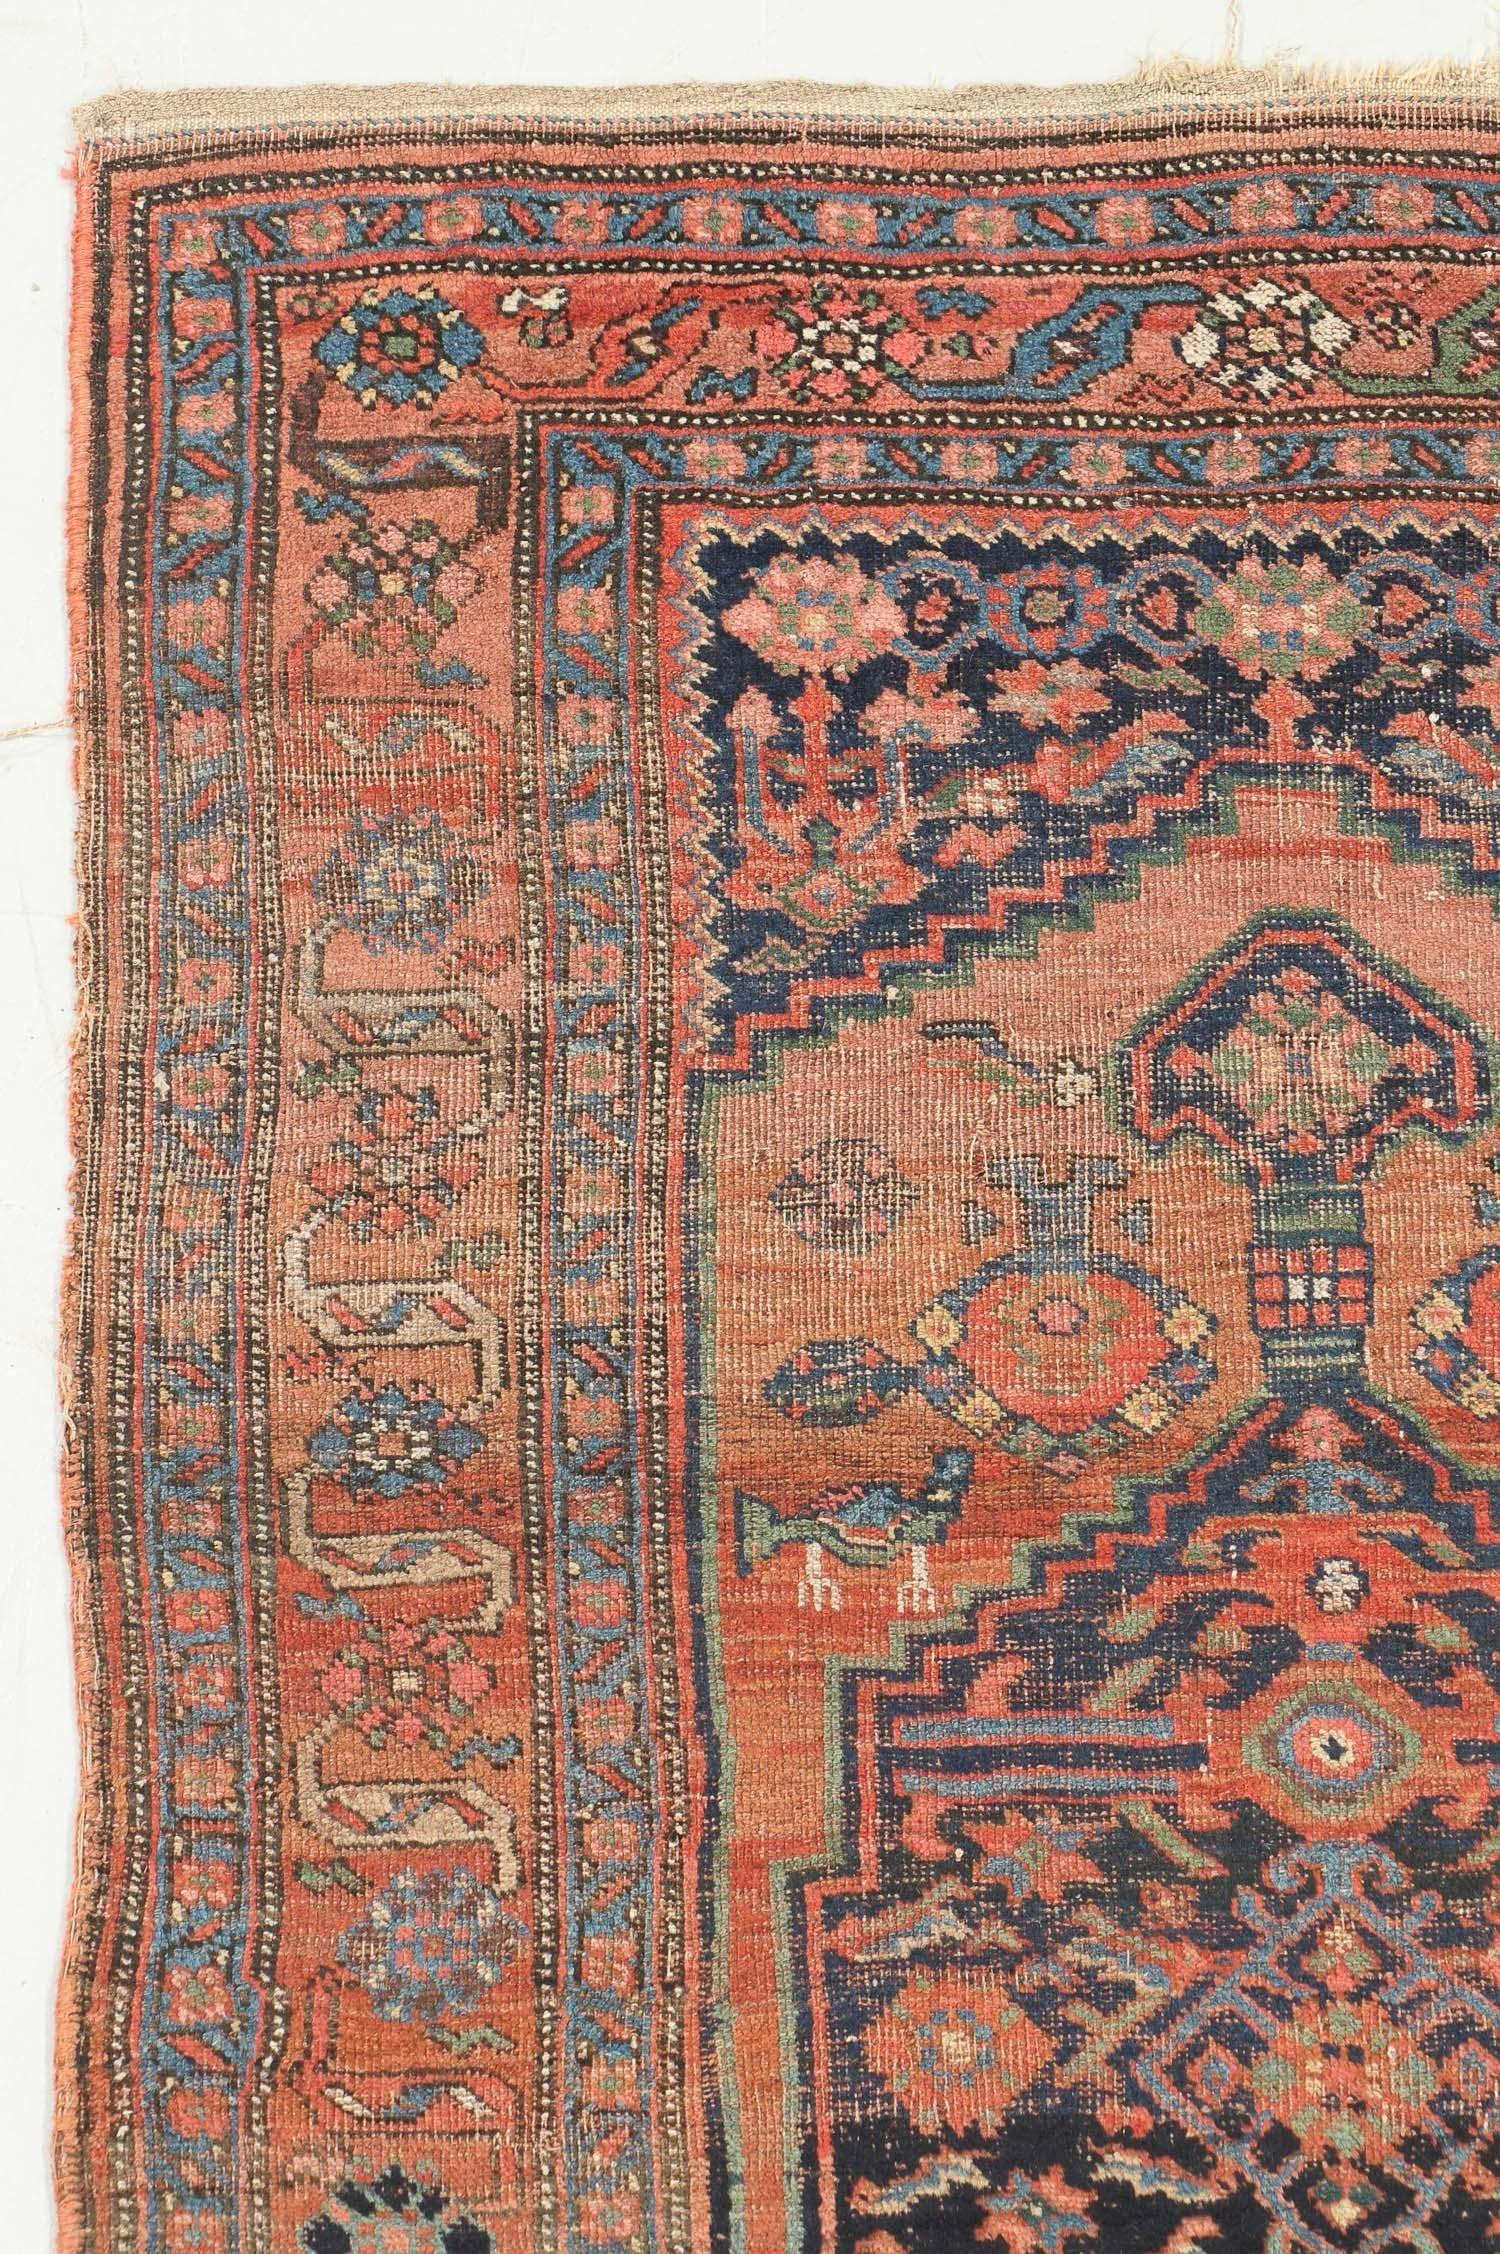 Divine Antique Nomadic Artistic Gem  Terracotta, Greens, Blackish-Indigo 

About: The epitome of what antique rugs should be; from design to color, and to artistic expression. The iconic elongated anchor medallion flanked by the deconstructed Herati